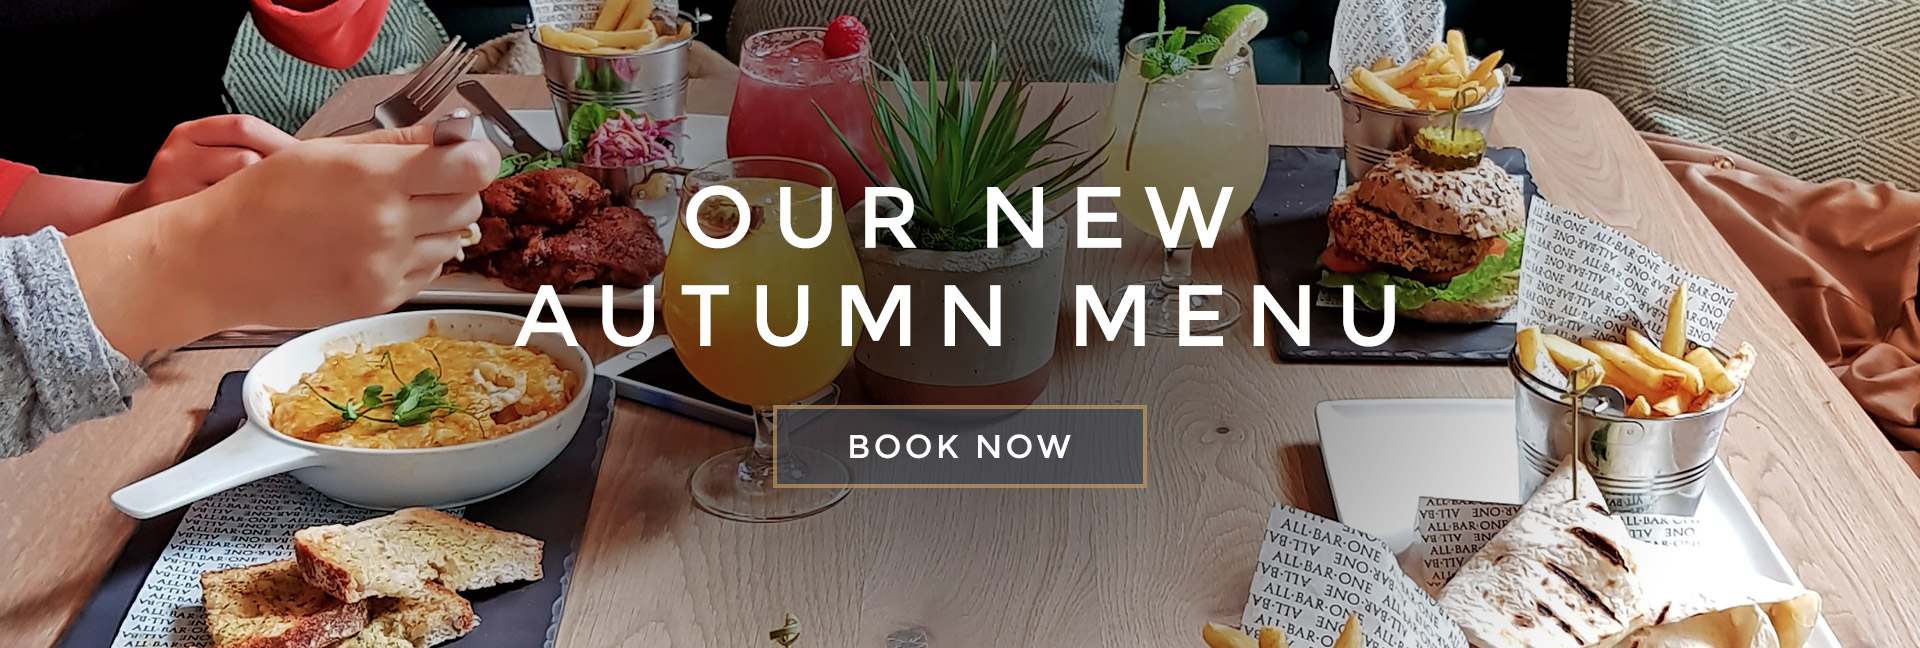 Our new Autumn menu at All Bar One Houndsditch - Book now